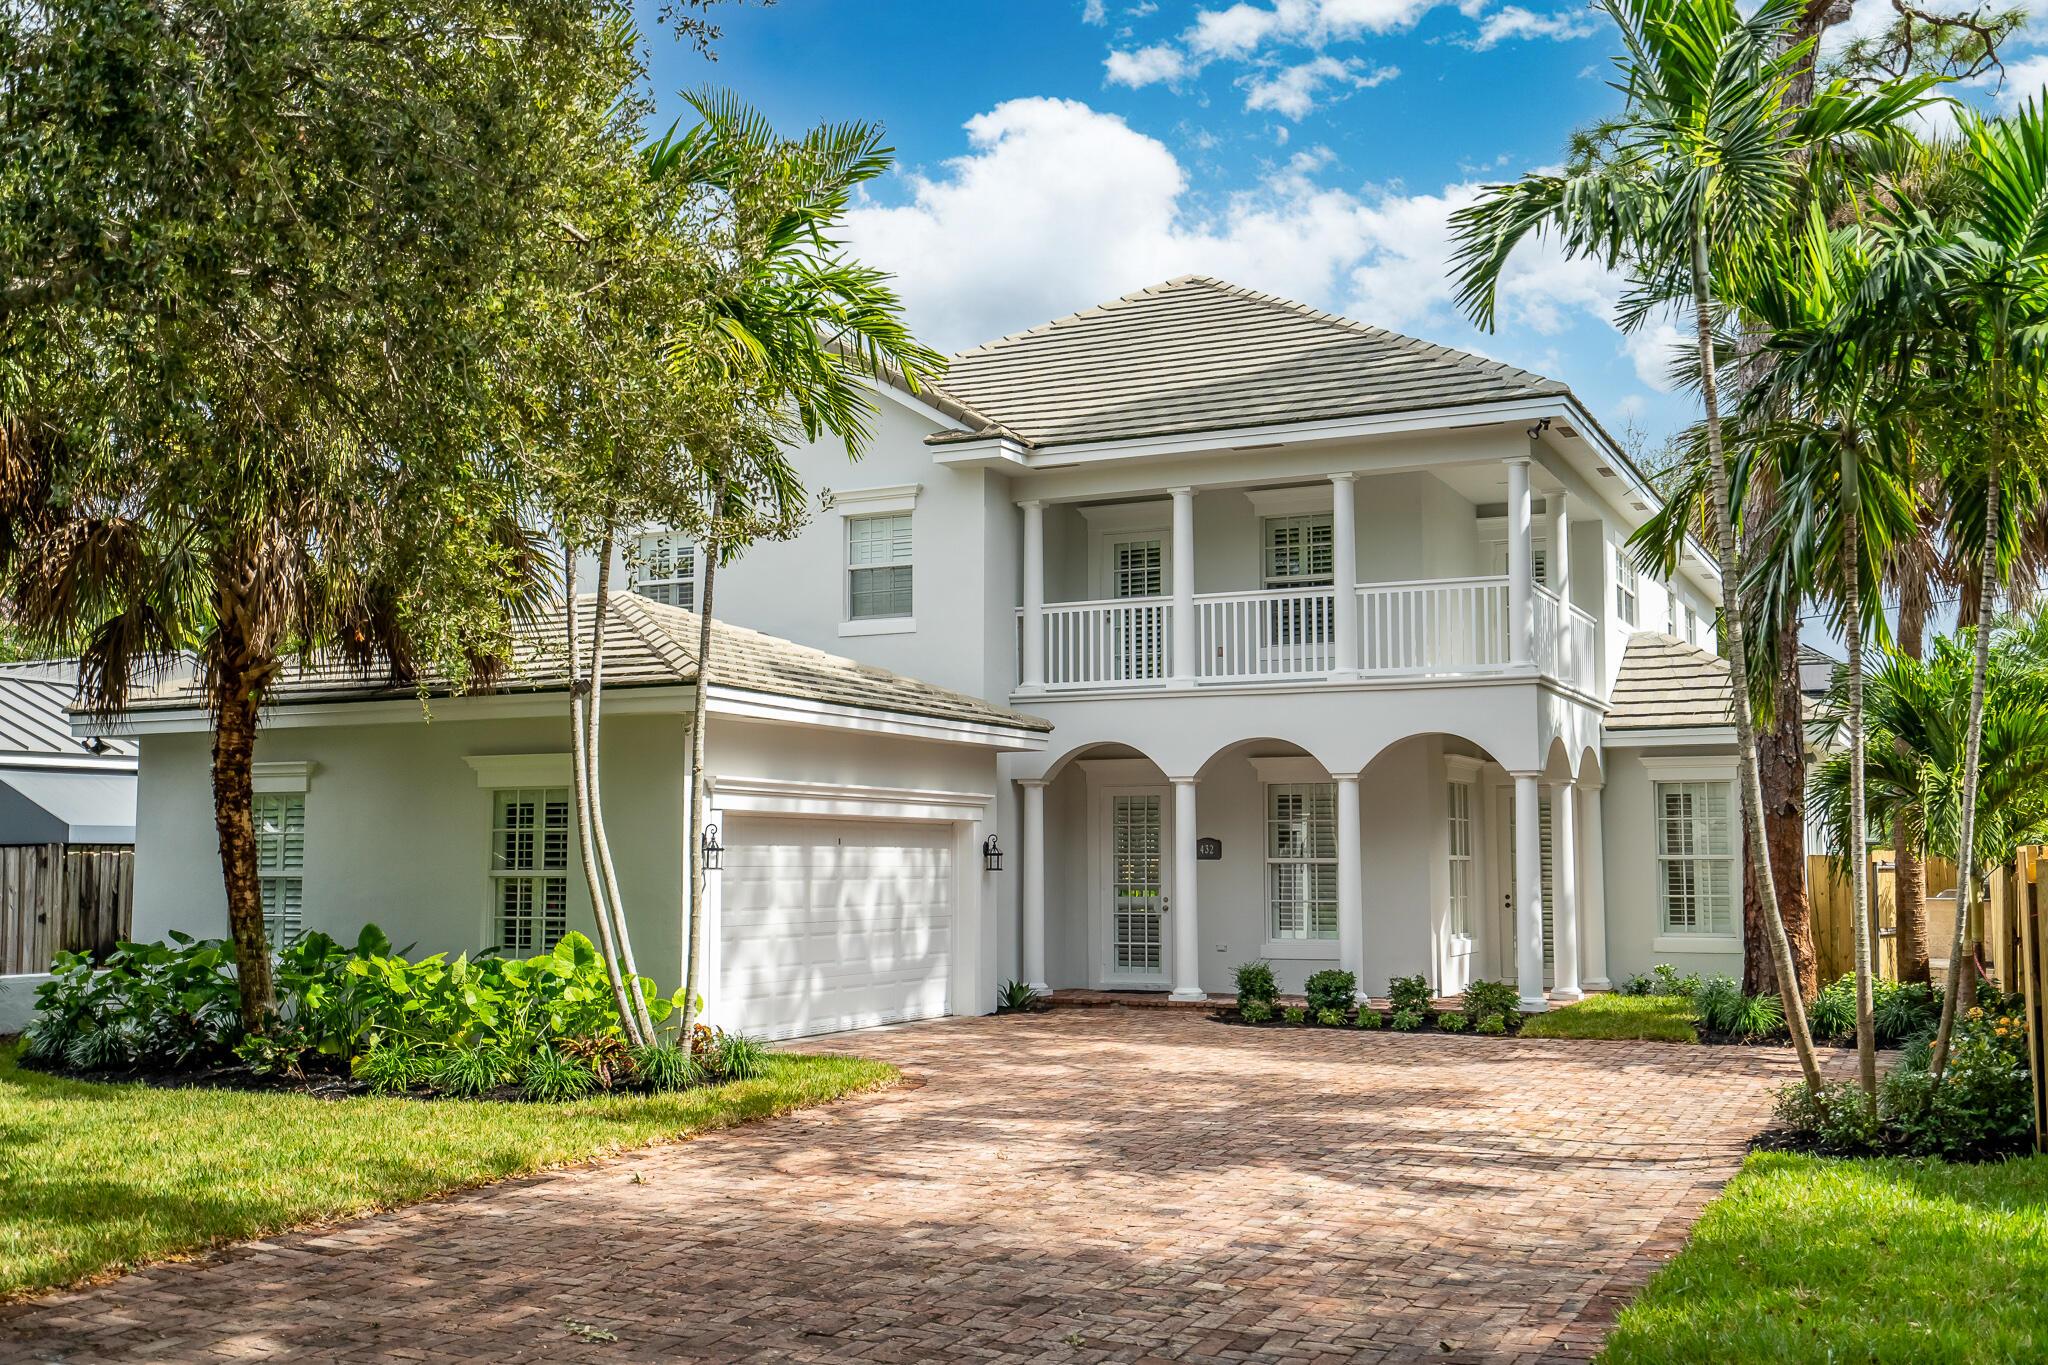 Best Value in Victoria Park! Just Blocks from Las Olas Blvd and a few minutes to the beach! Live the vacation lifestyle all year long in this Custom Builders-Model pool home. 4460 sq feet total with approximately 3600 sq feet under air | 5 Bedroom | 5 Bathroom |2 Car finished garage | Private covered balconies | Spacious floor plan with high ceilings and first floor office that could be used as 5th bedroom: Includes marble floors, granite counter tops & crown molding. Formal living, dining and family rooms. Kitchen has custom cabinets, Stainless Steel appl, pantry. Hurricane glass. Each bdrm has ensuite bathroom. Huge Master bdrm, Whirlpool bath, shower body sprayers and 2 large walk-in closets. Large Private gated yard for entertaining, covered porch, tumbled marble pavers,